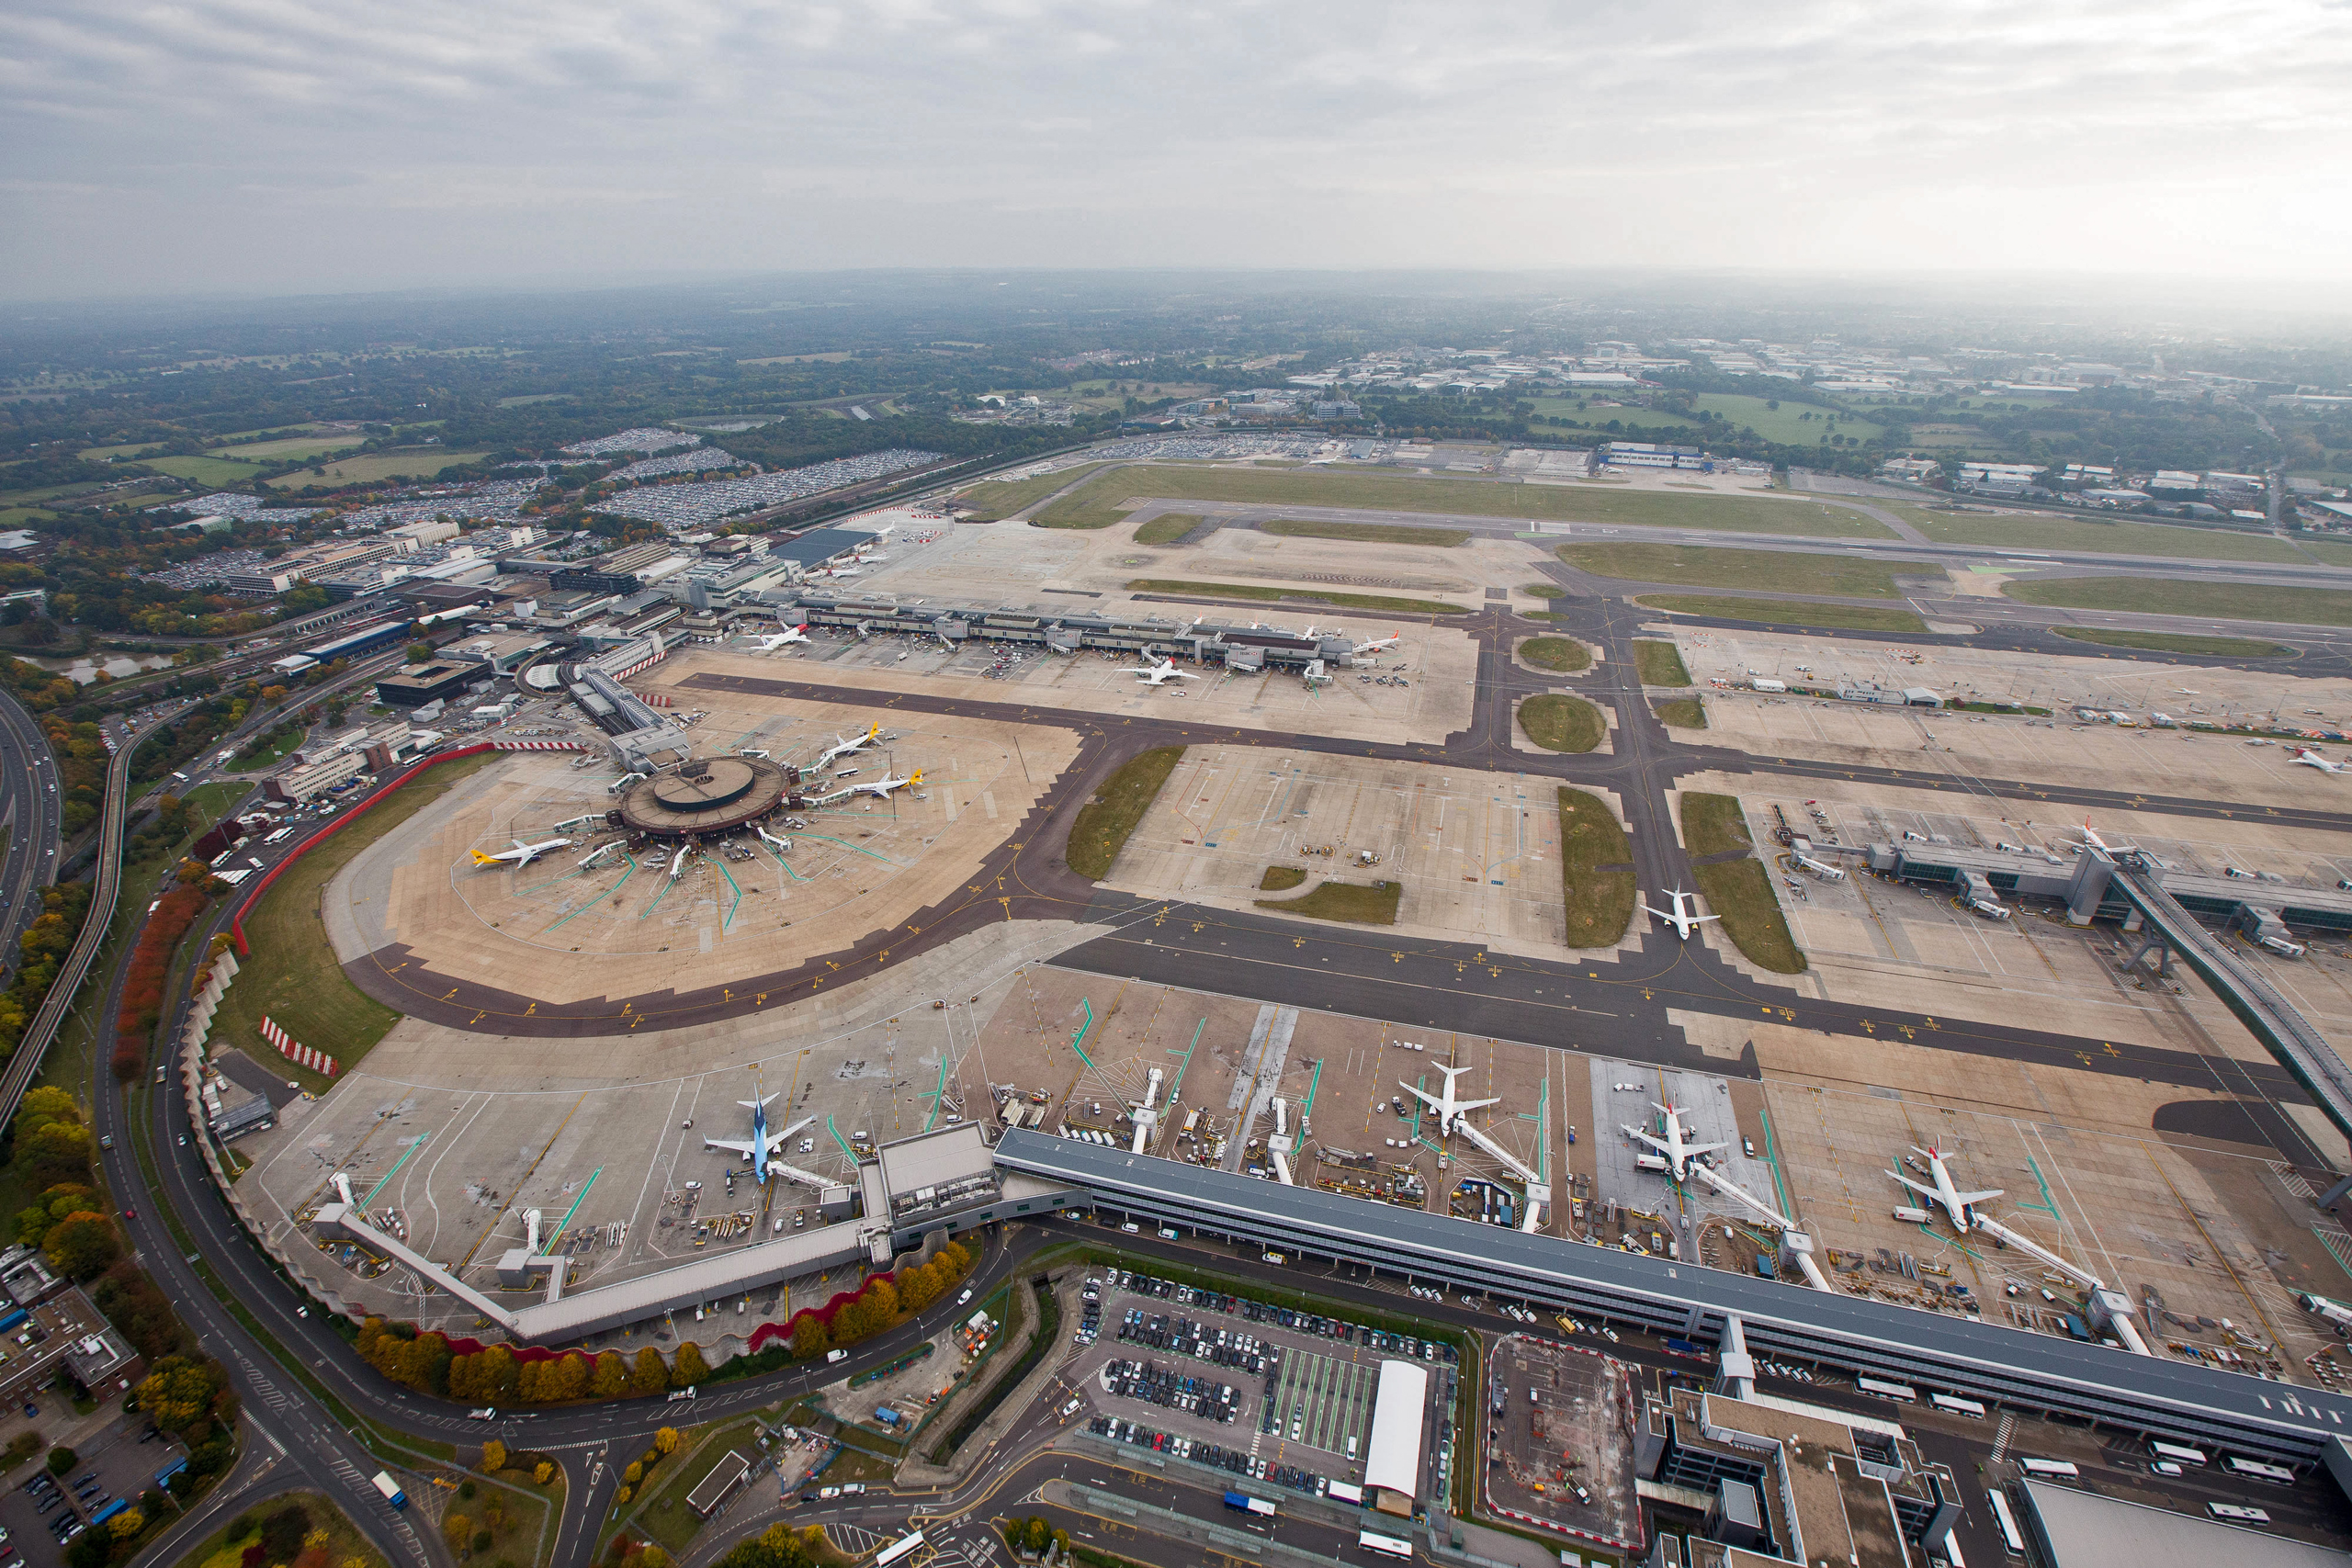 There was chaos at Gatwick airport when drones were spotted above the runways. (Bloomberg&mdash;Bloomberg via Getty Images)